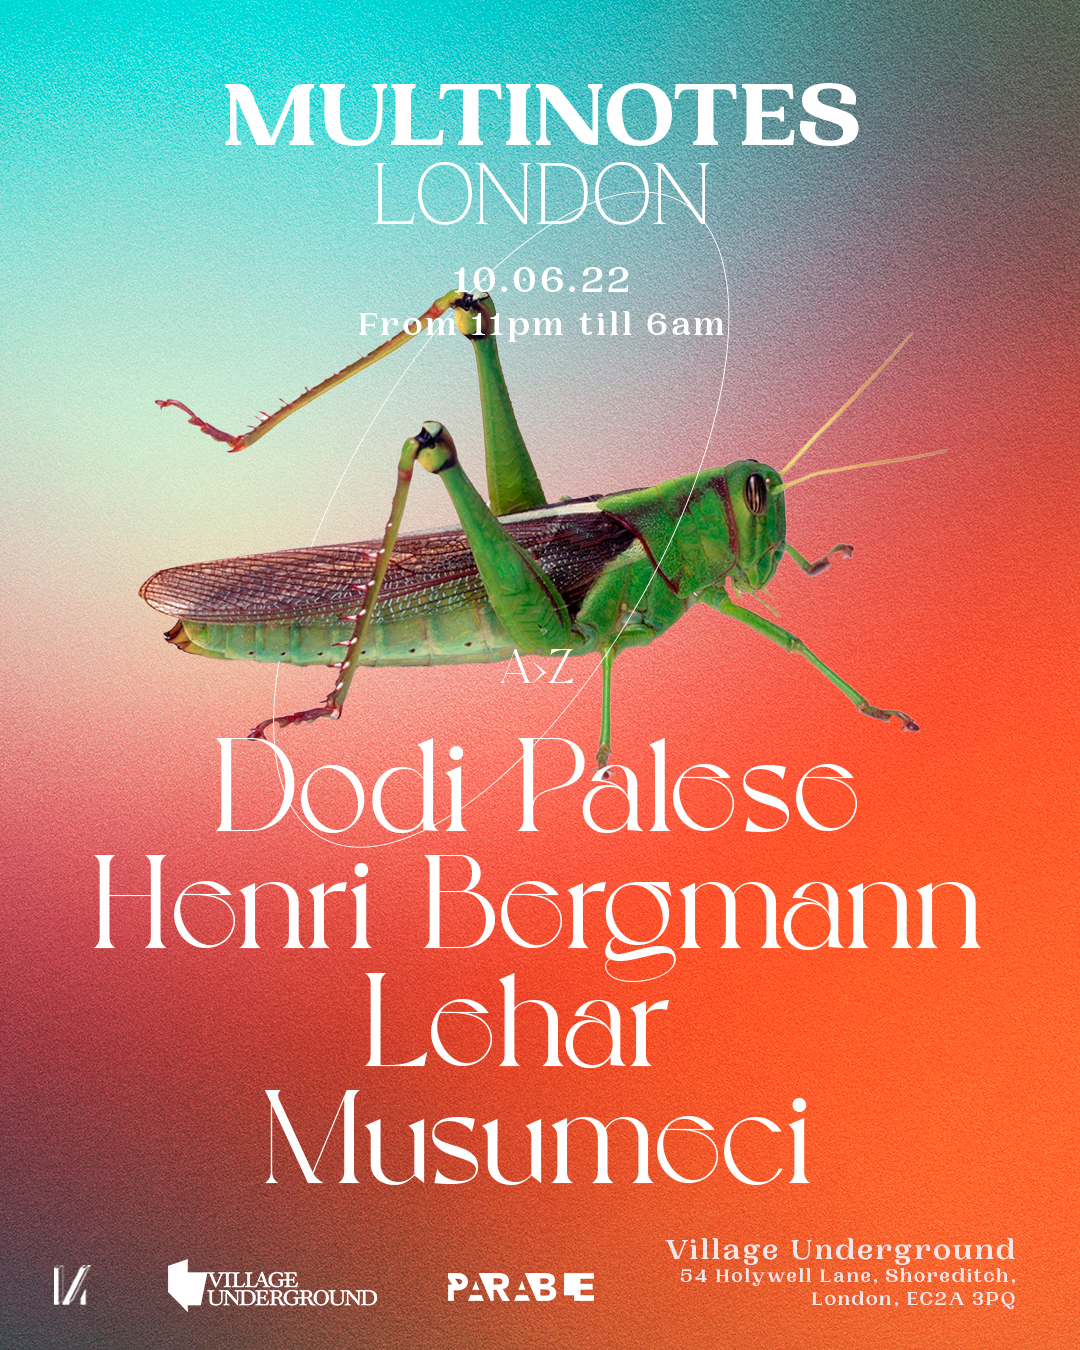 [CANCELLED] Parable presents: Multinotes London with Lehar, Musumeci & guests - Flyer front